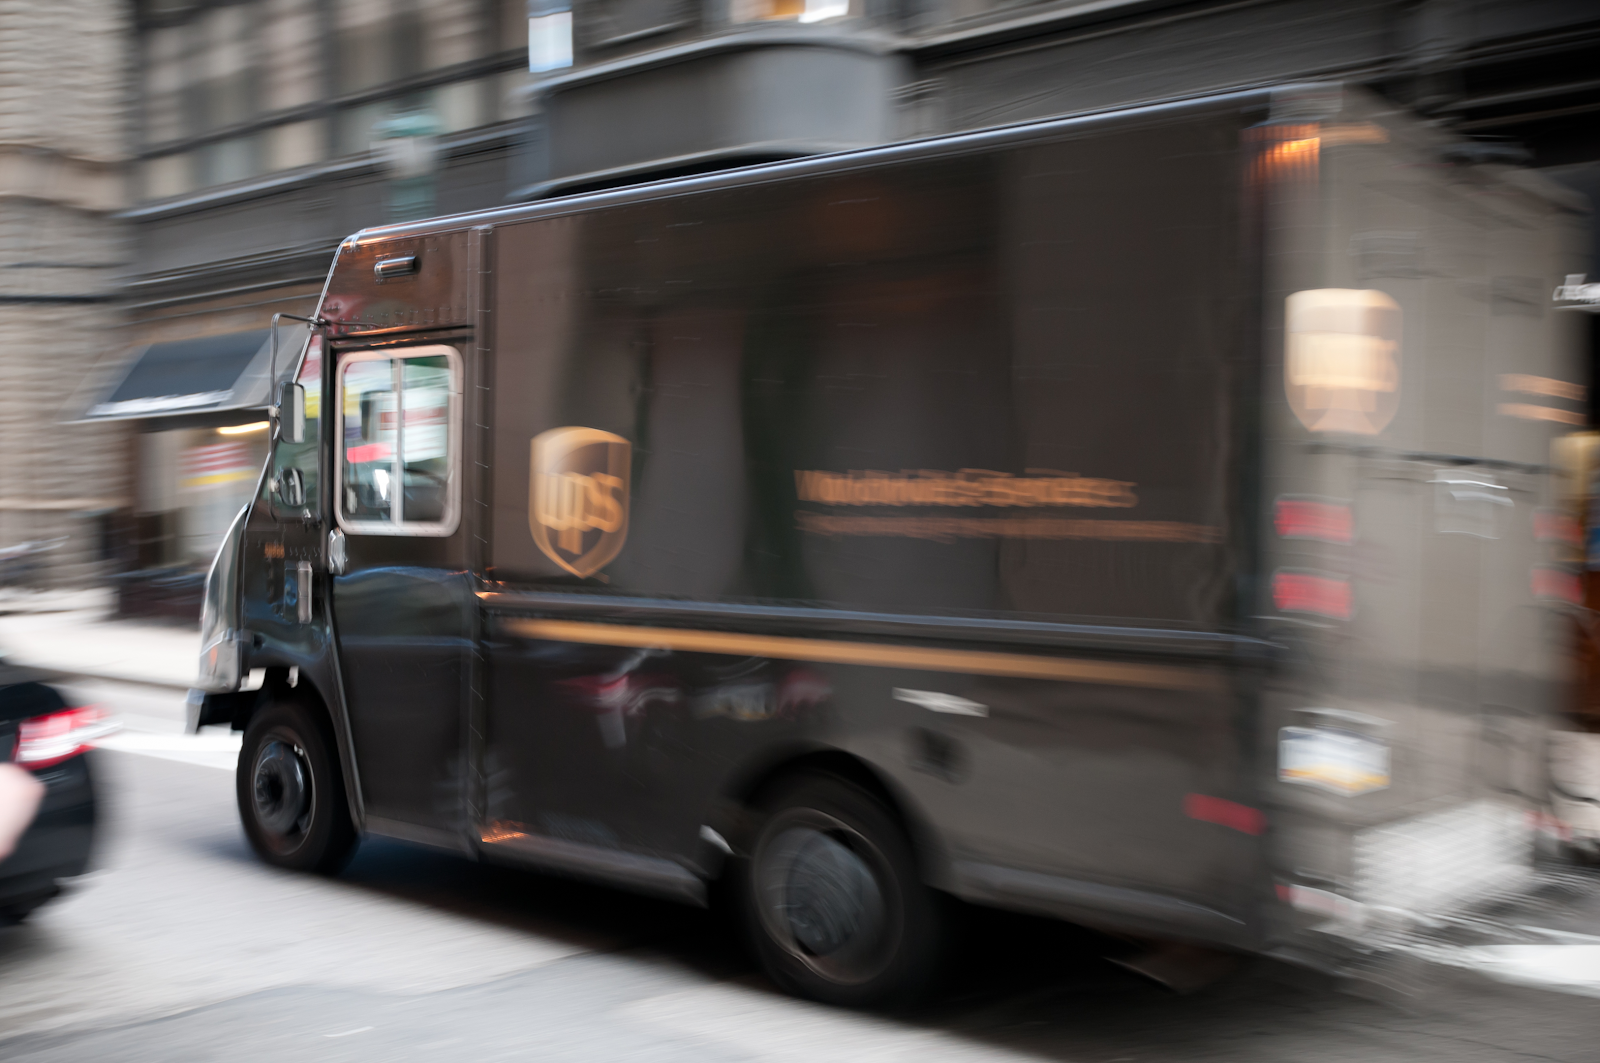 United parcel service UPS driver in a ups vehicle speeding down the road